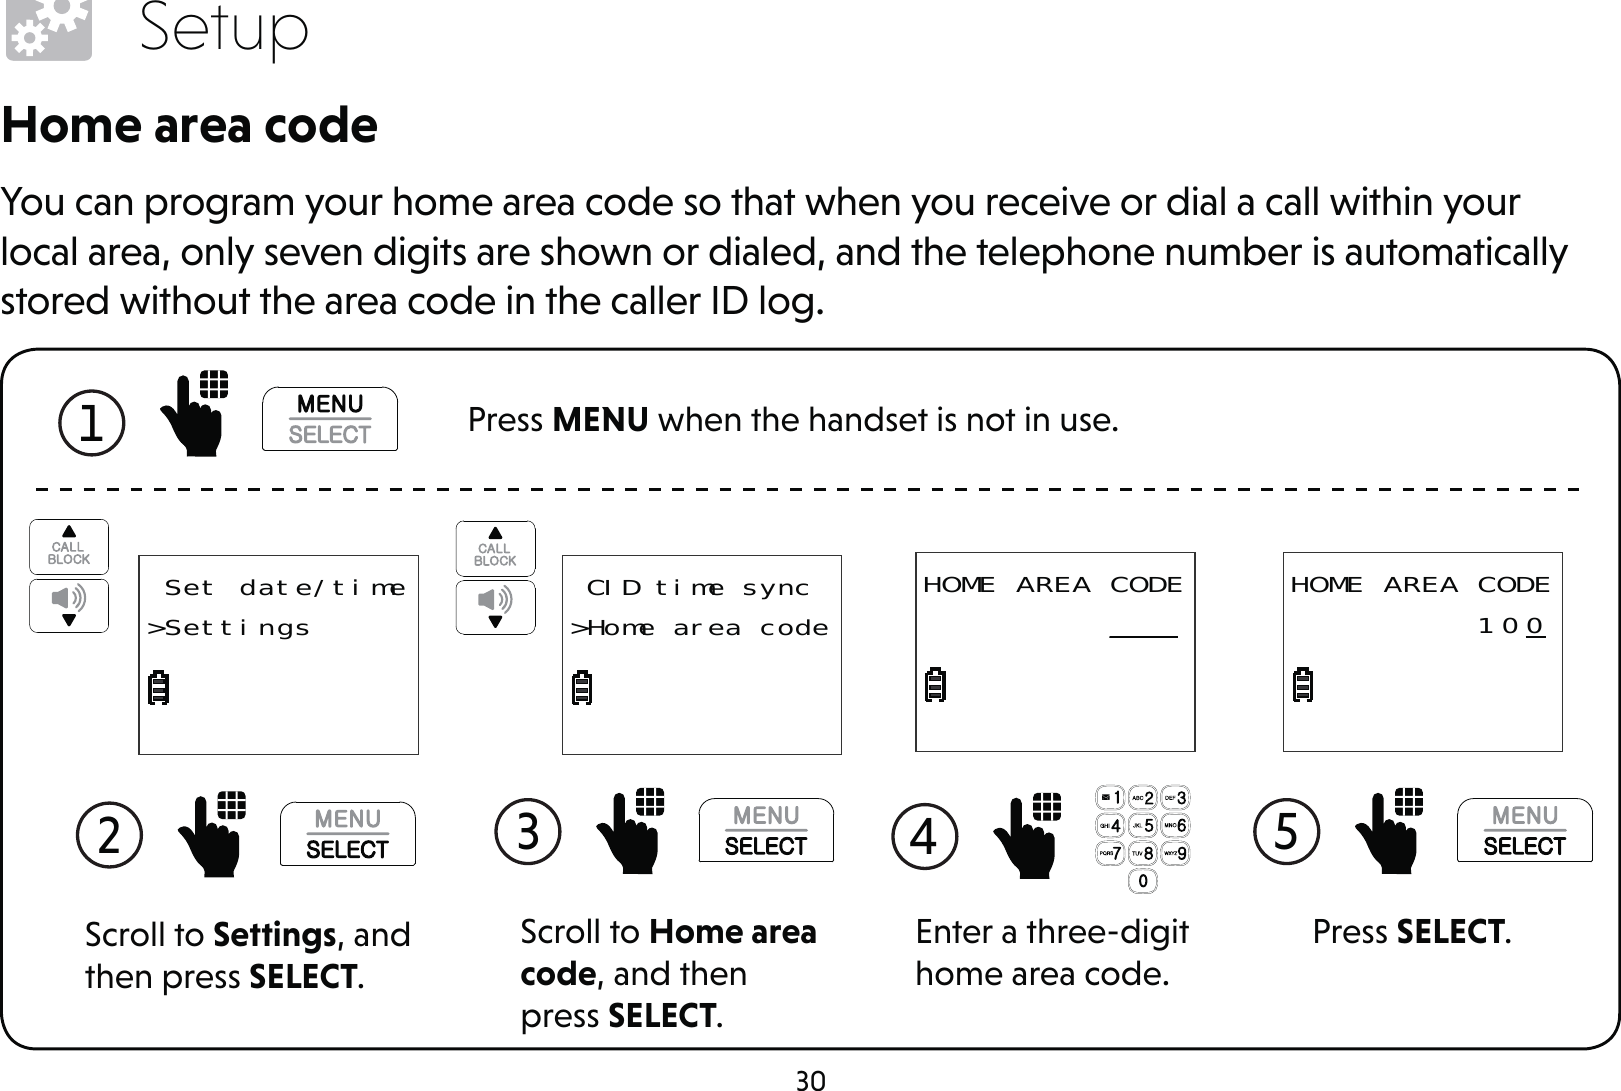 30SetupHome area codeYou can program your home area code so that when you receive or dial a call within your local area, only seven digits are shown or dialed, and the telephone number is automatically stored without the area code in the caller ID log.1  Press MENU when the handset is not in use.Scroll to Settings, and then press SELECT.2  Set date/time&gt;SettingsScroll to Home area code, and then press SELECT.3  CID time sync&gt;Home area codeEnter a three-digit home area code.4 HOME AREA CODE          ___Press SELECT.5 HOME AREA CODE          10 0